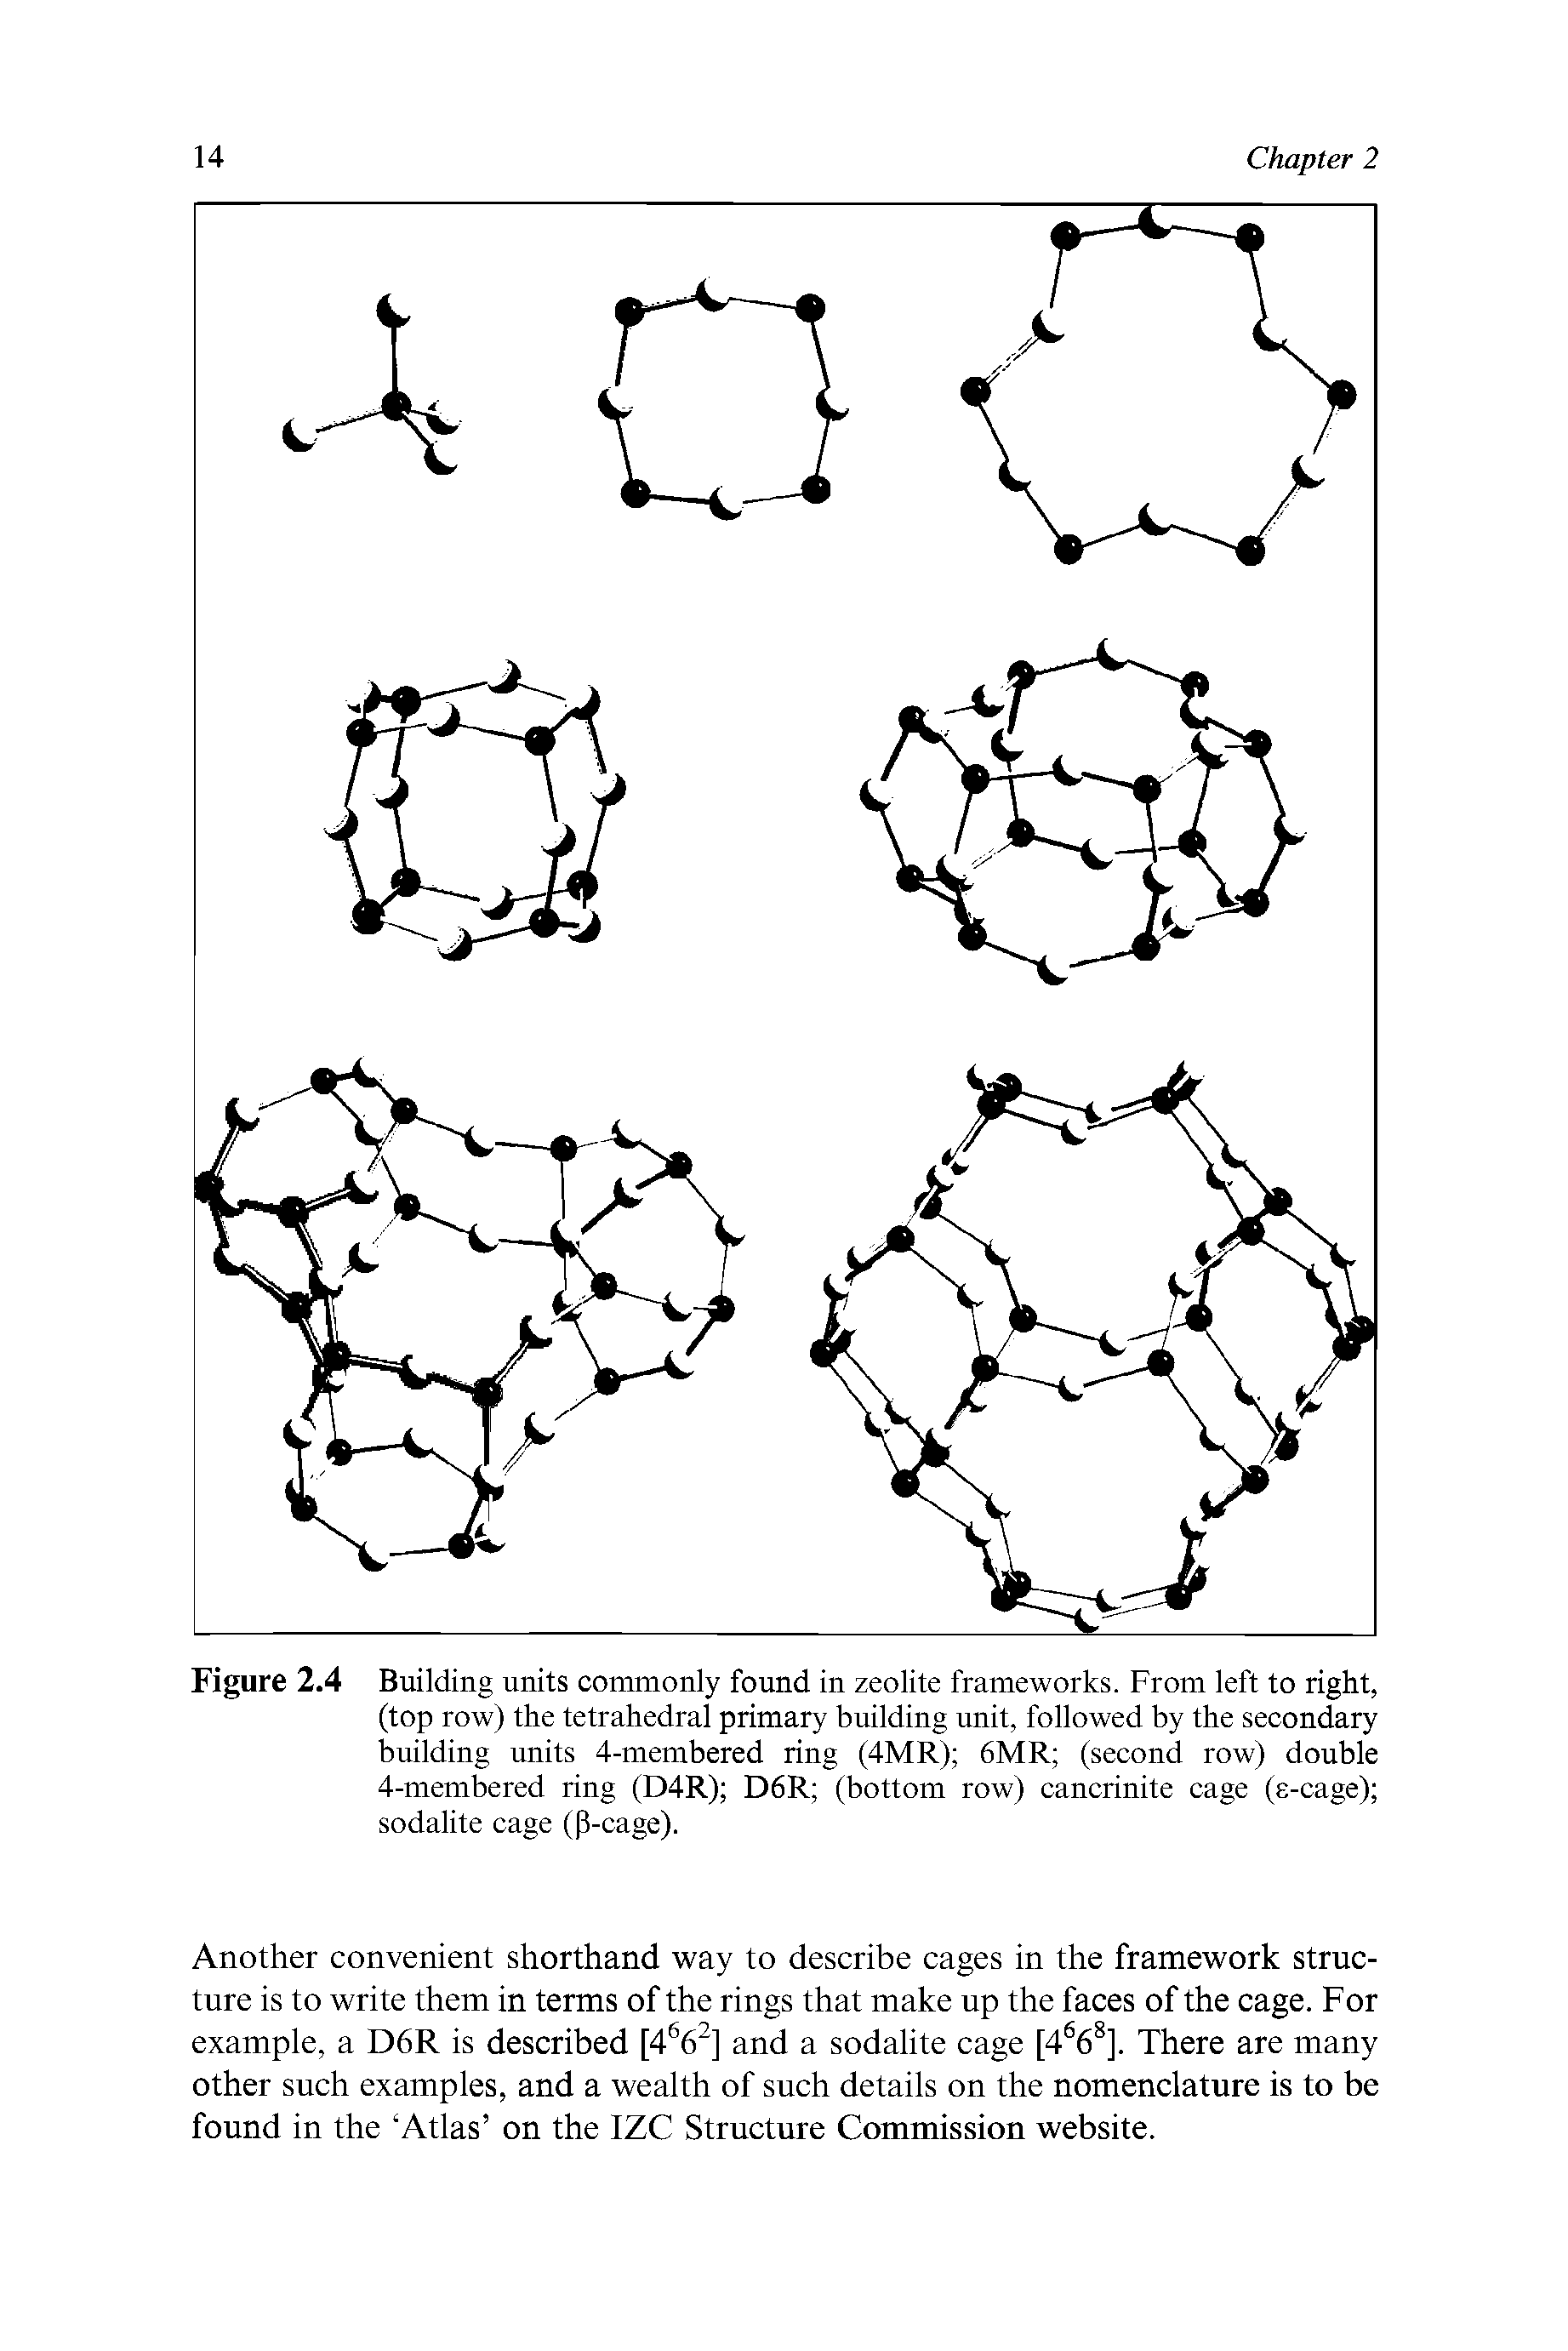 Figure 2.4 Building units commonly found in zeolite frameworks. From left to right, (top row) the tetrahedral primary building unit, followed by the secondary building units 4-membered ring (4MR) 6MR (second row) double 4-membered ring (D4R) D6R (bottom row) cancrinite cage (e-cage) sodalite cage (P-cage).